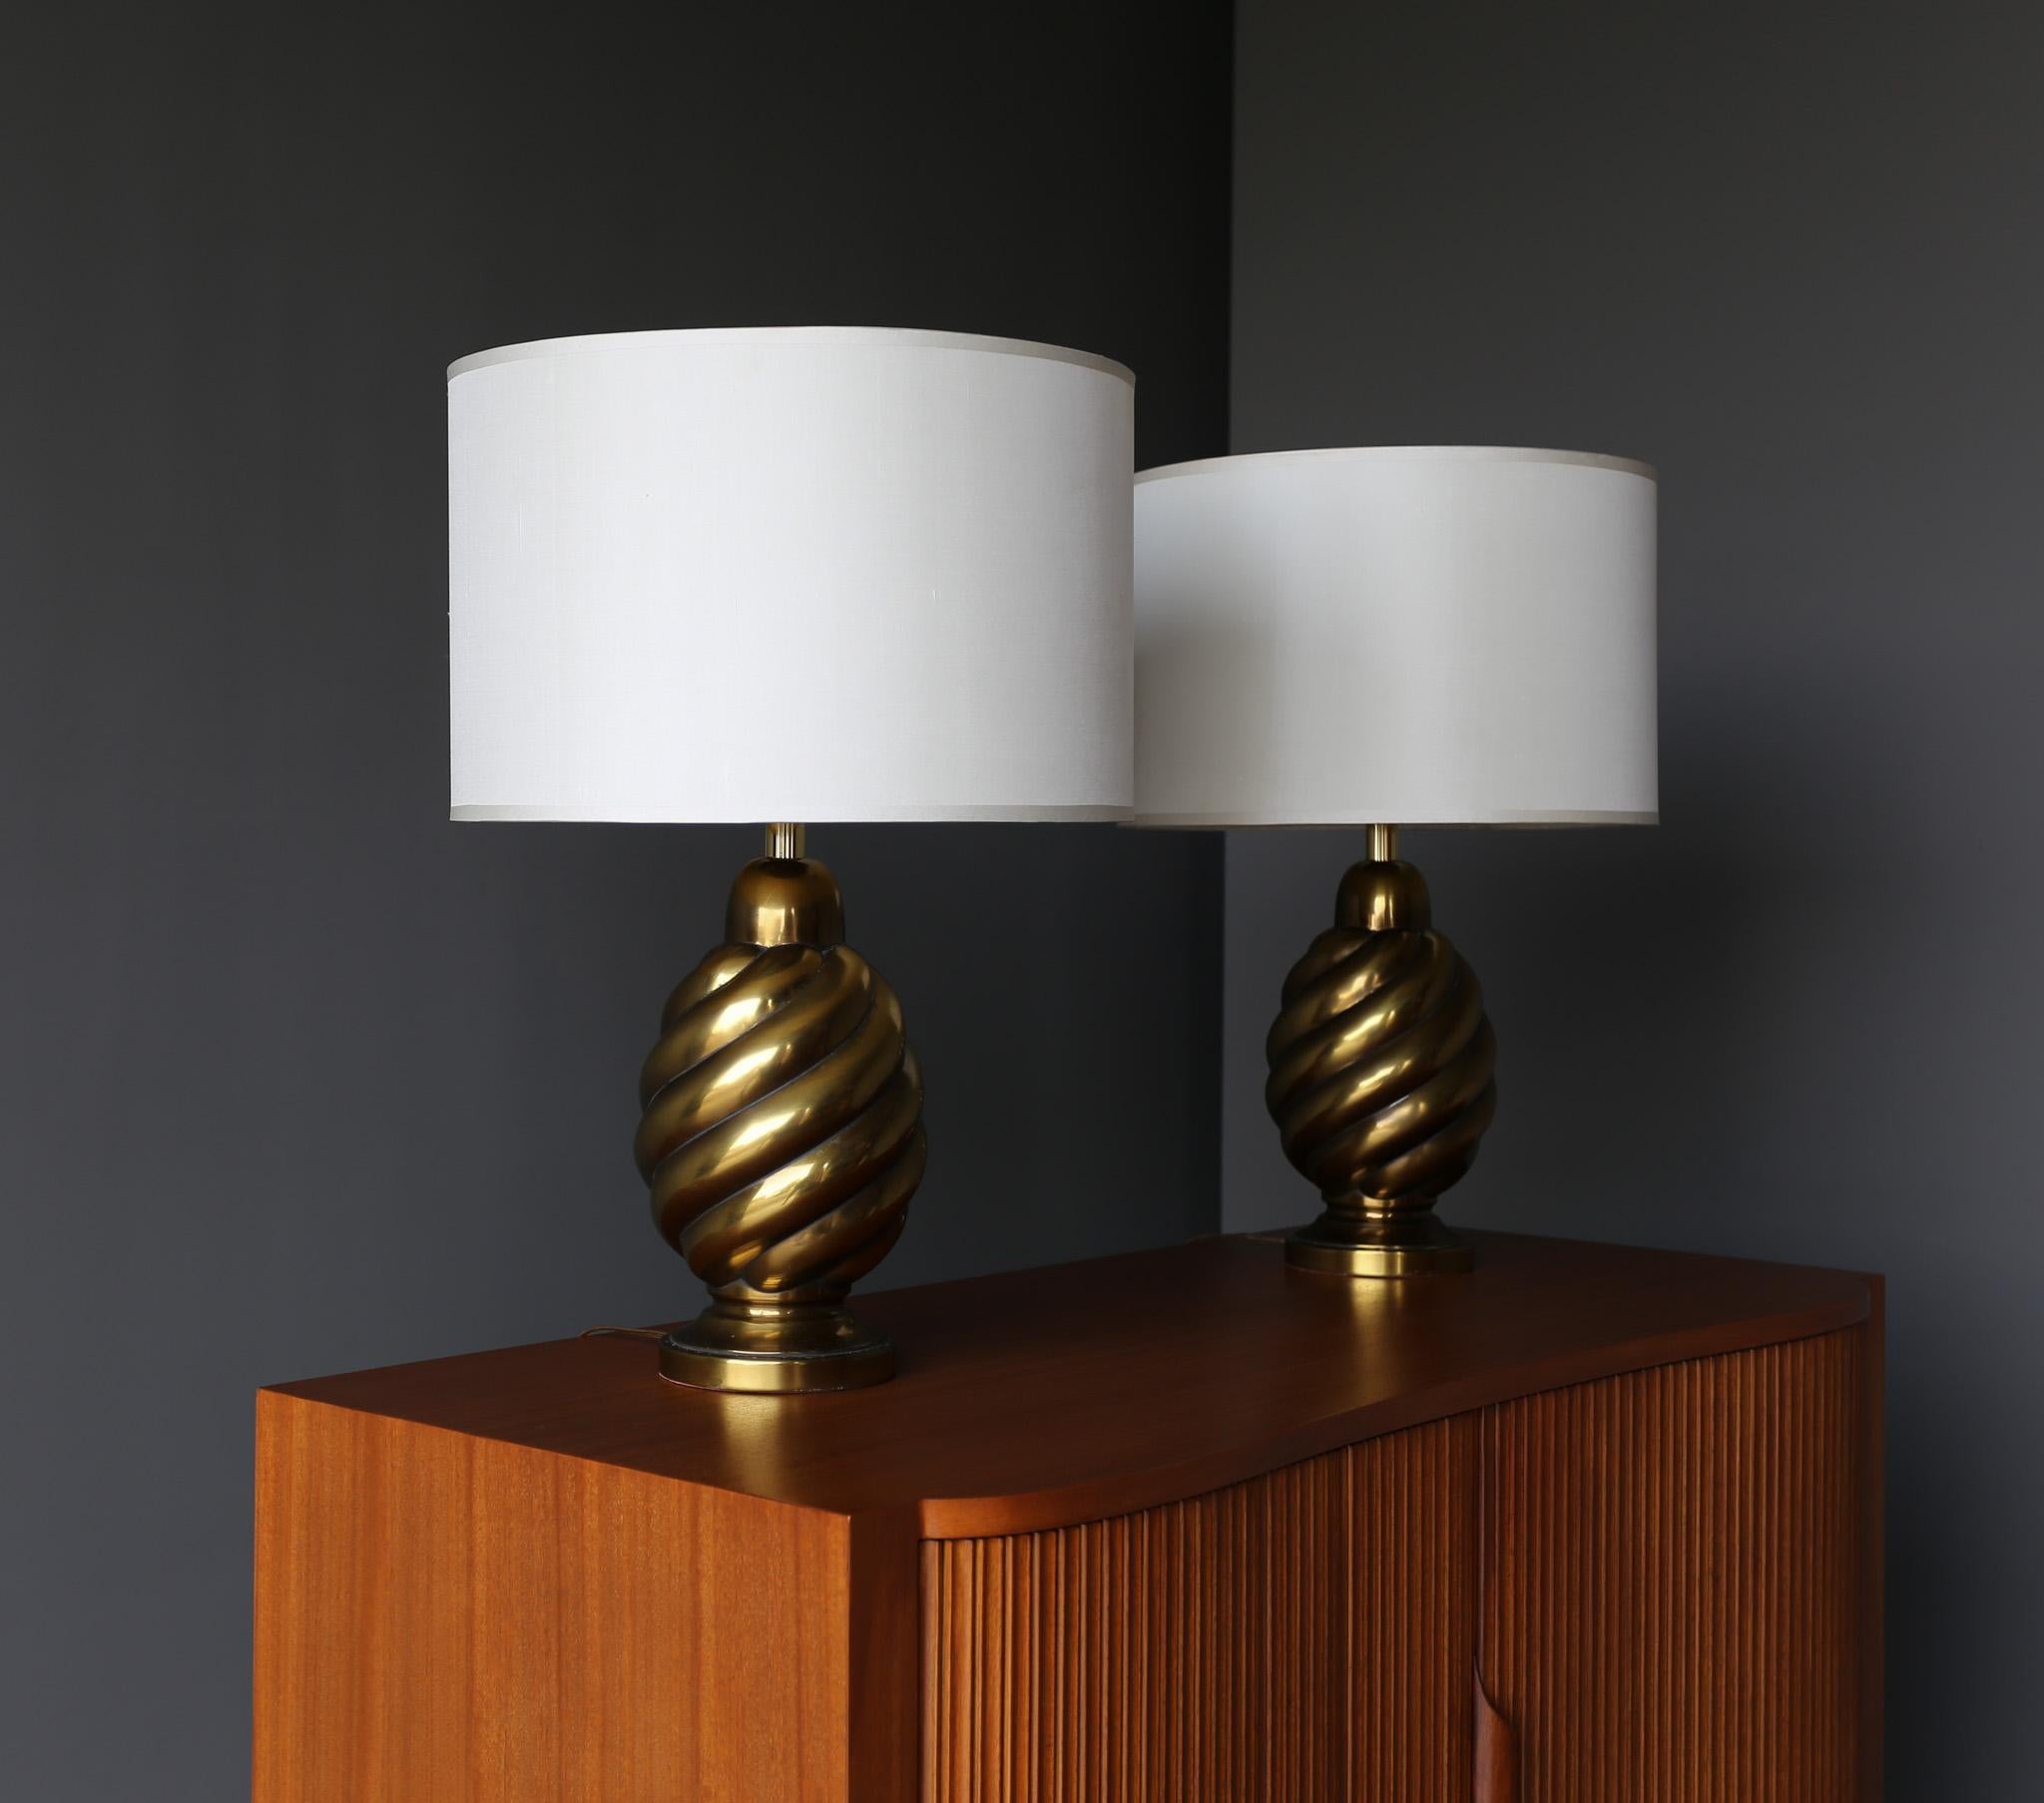 Westwood Industries Aged Brass Lamps, United States, c.1970 2